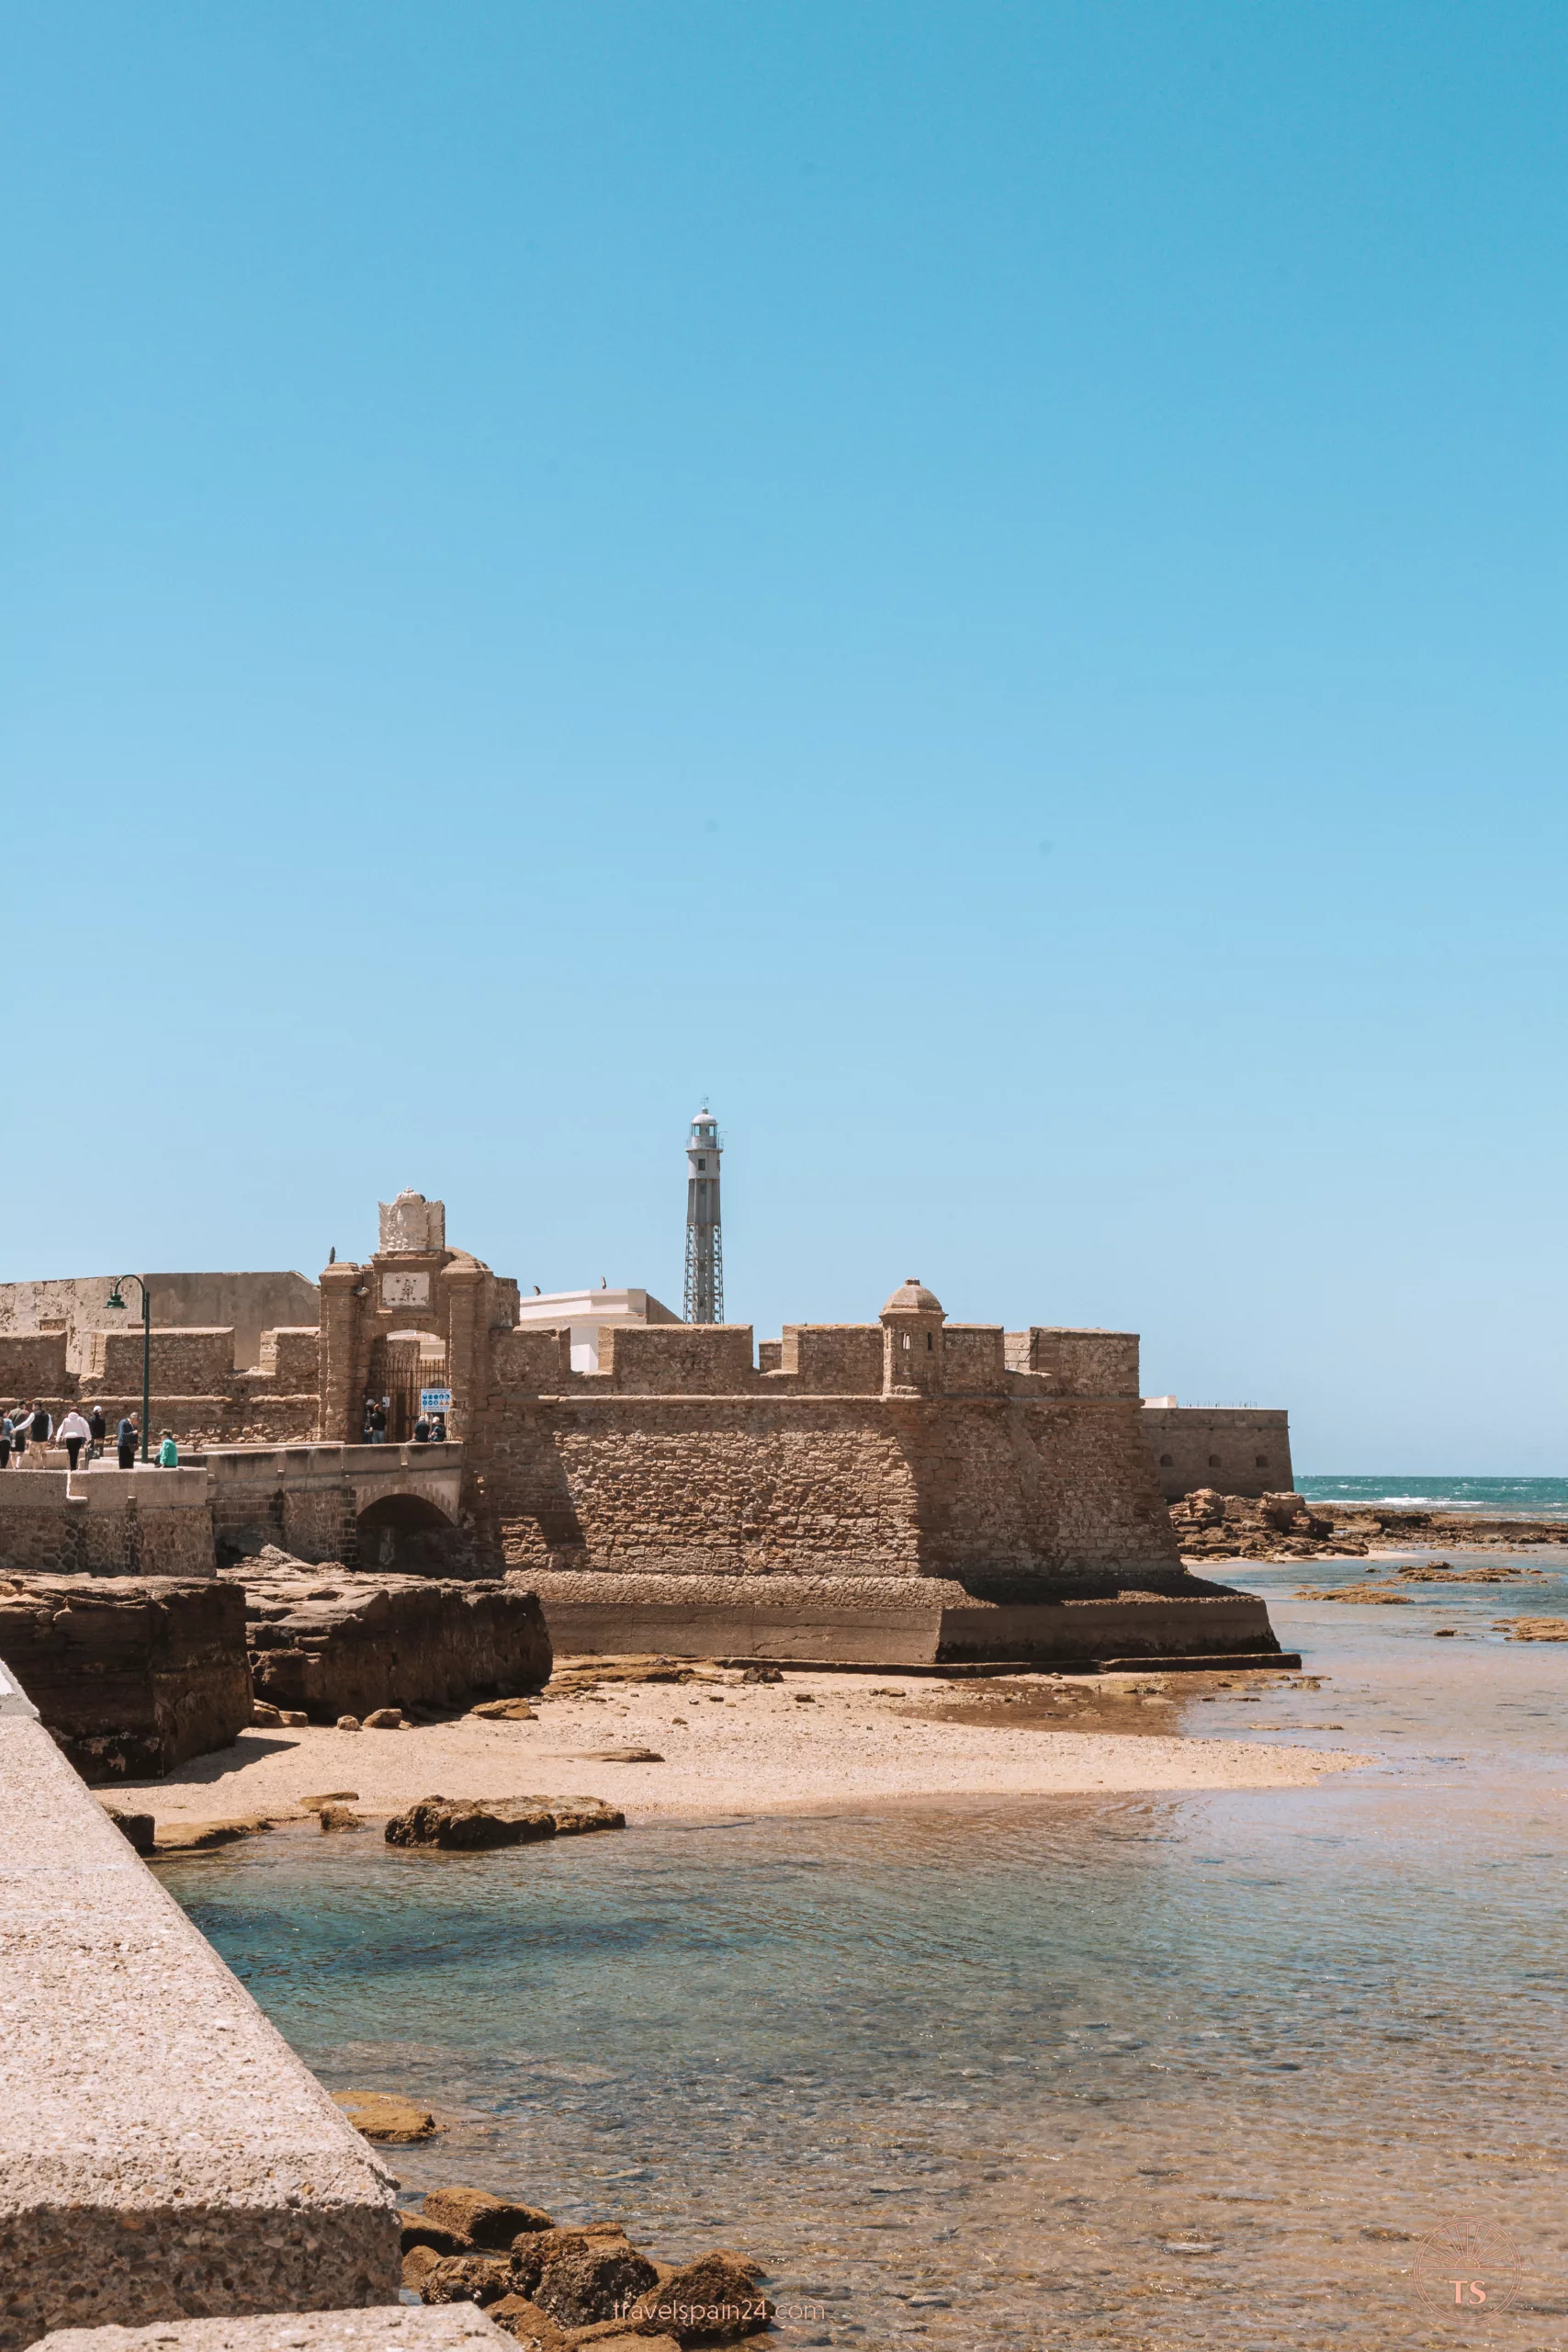 Castillo de San Sebastián in Cadiz, showcasing its historic fortifications along the coastline. This castle is one of the Cadiz highlights, reflecting the city's rich military history and scenic views.
